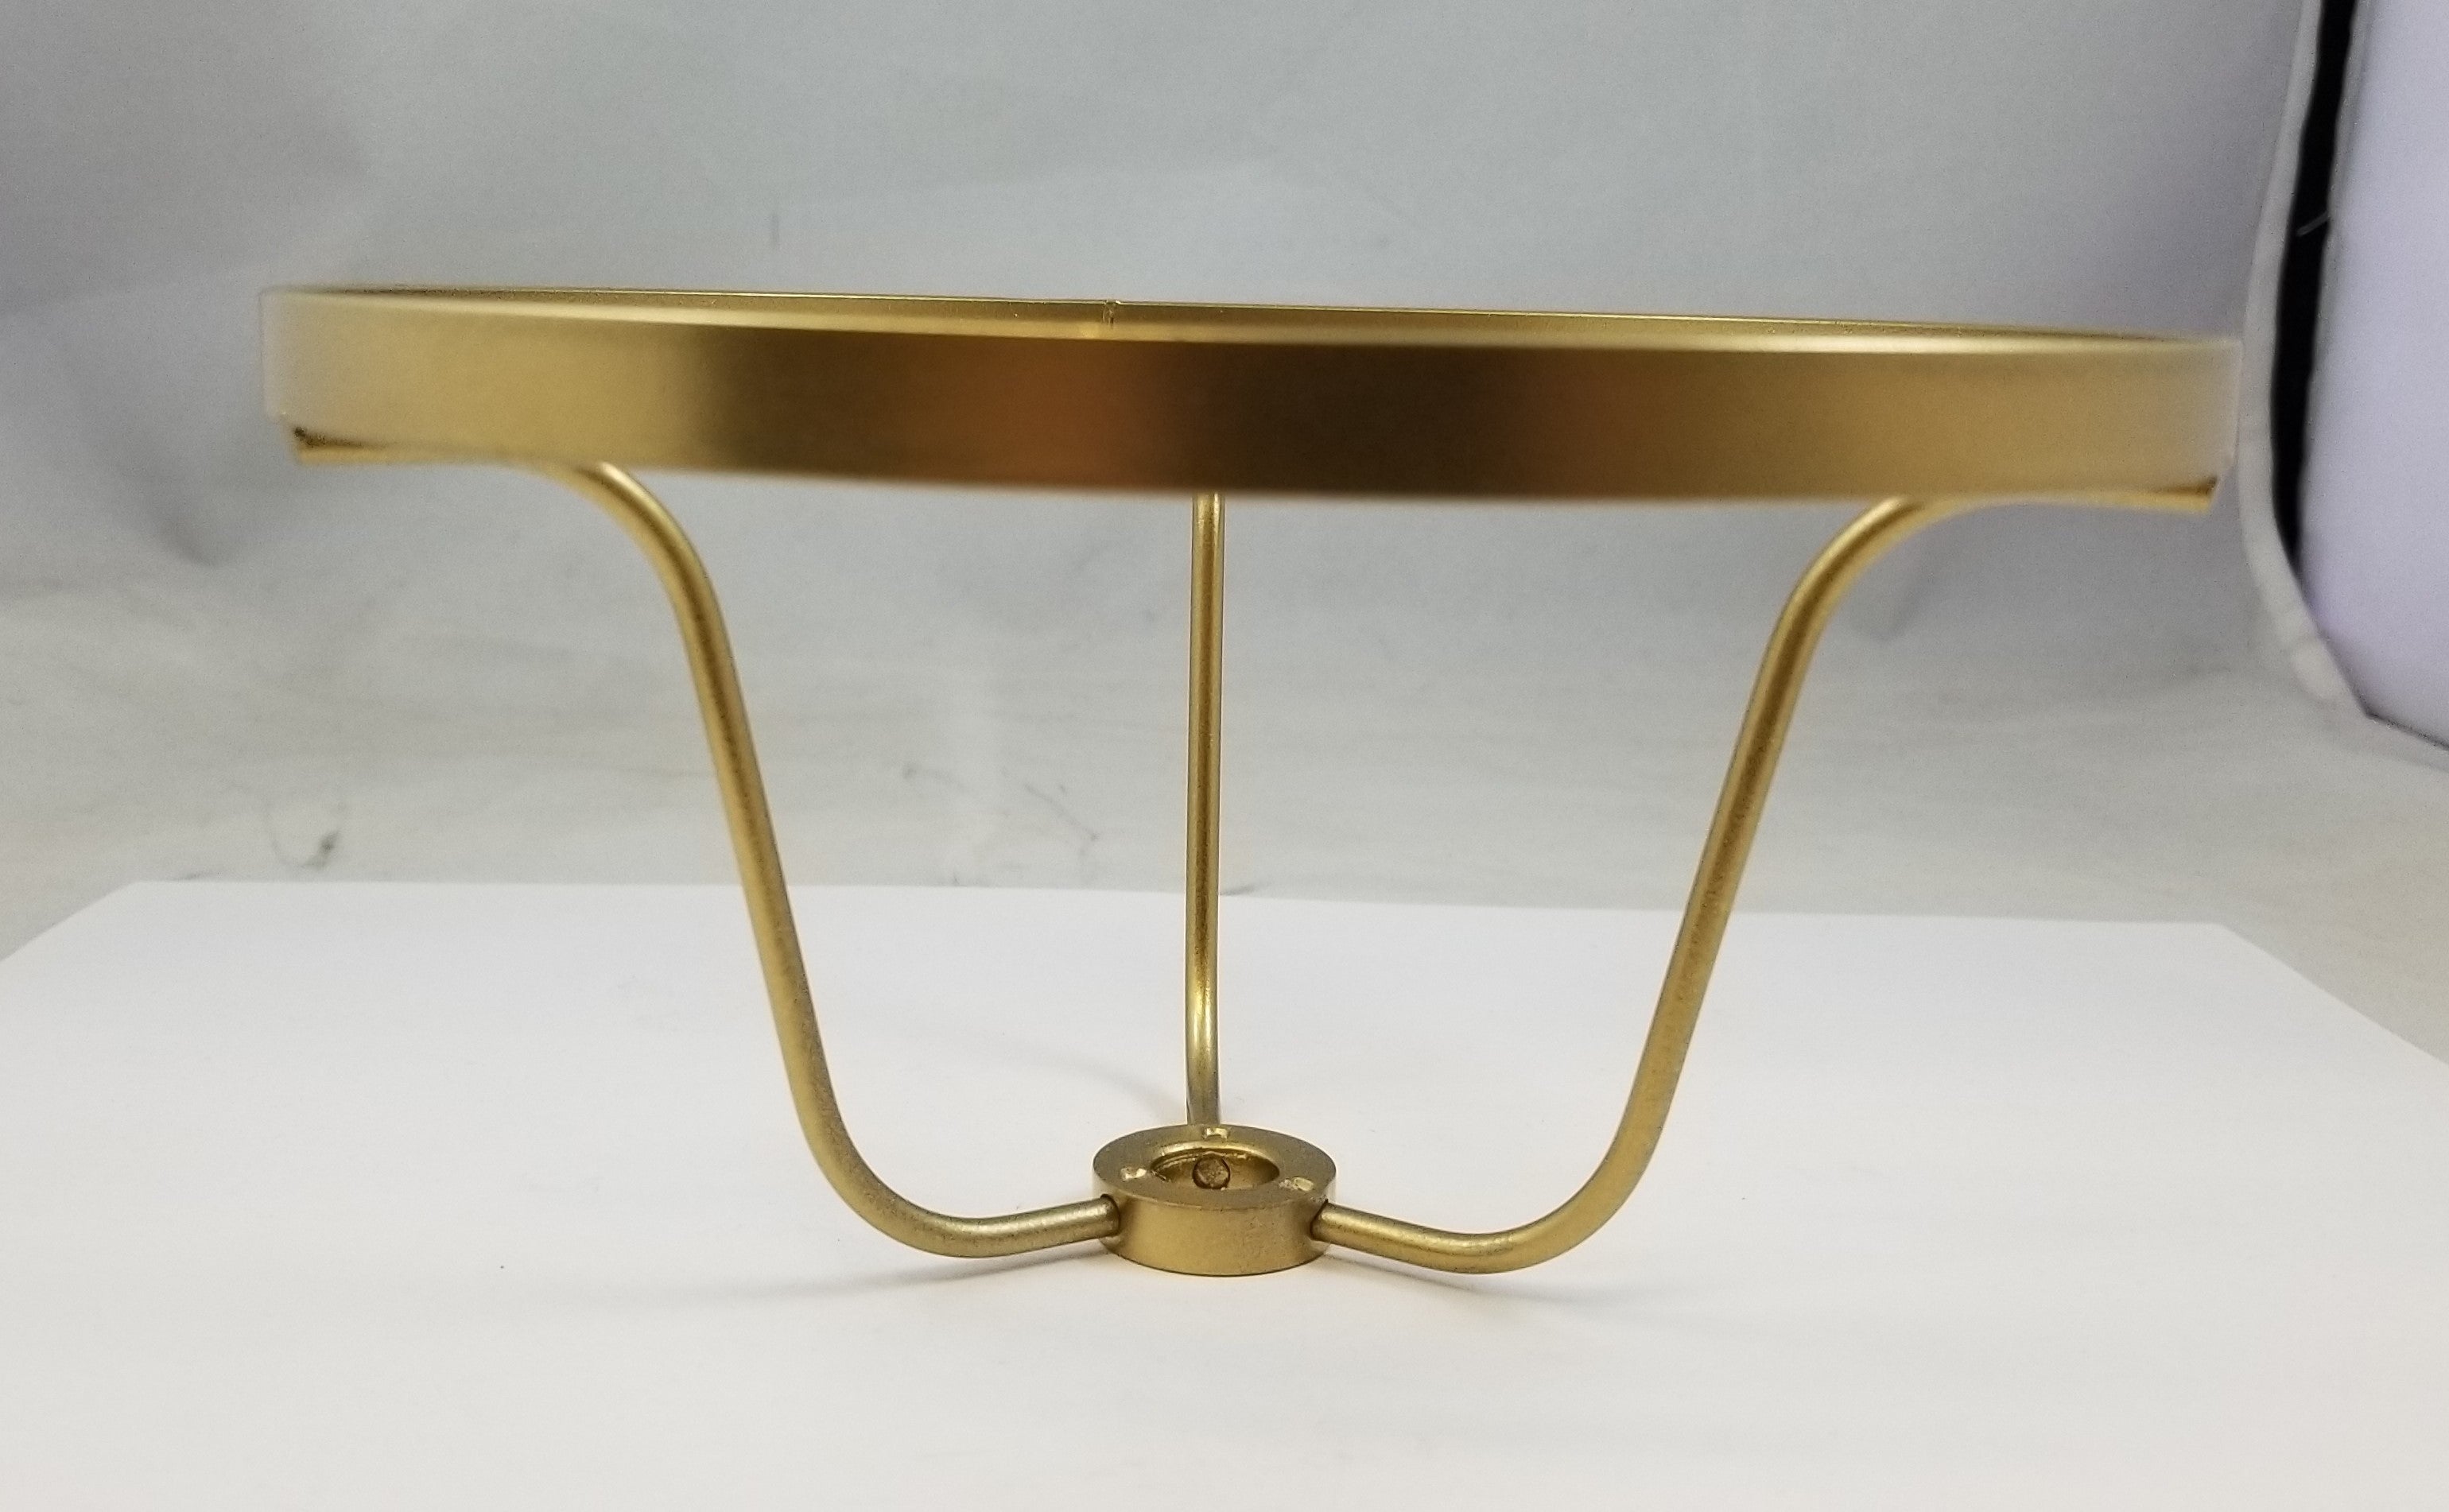 6" Brass Finish & Lacquered Student Shade Holder